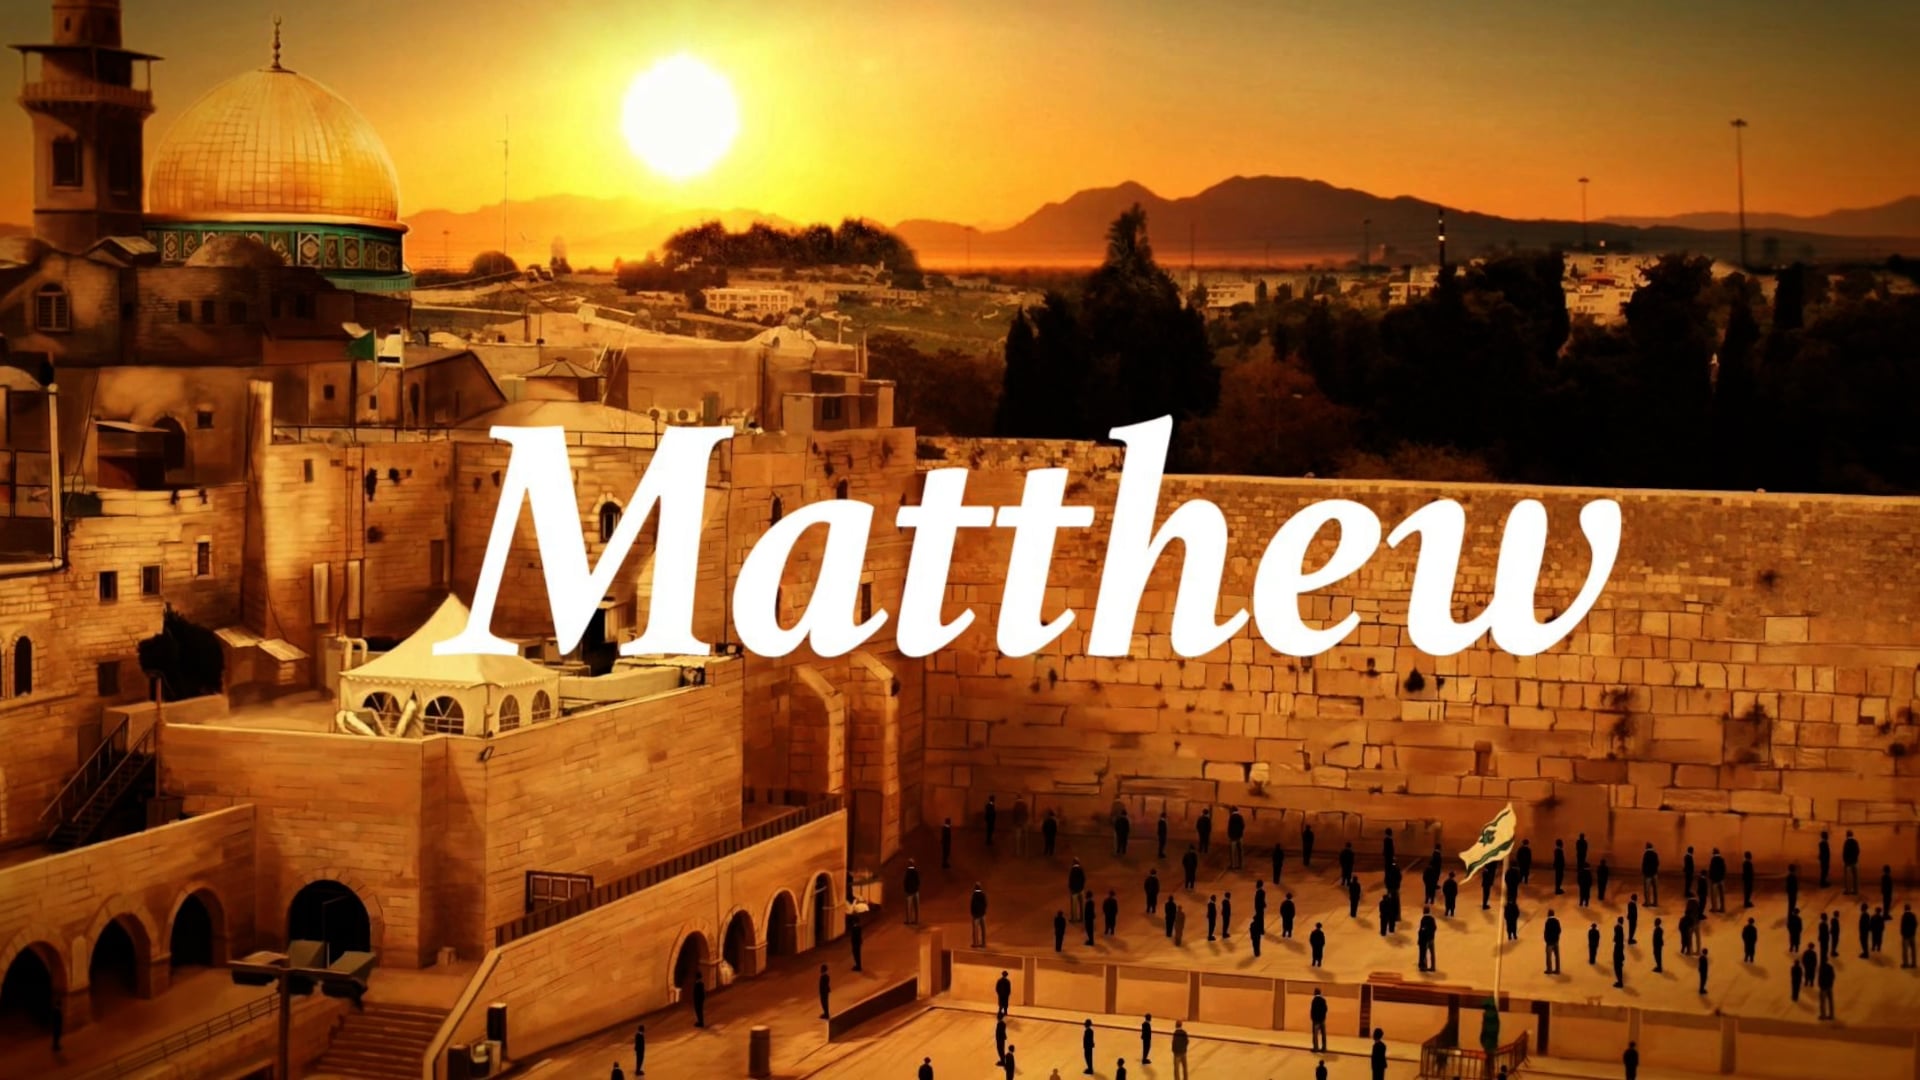 Matthew 16:1-12 "The Leaven of the Pharisees and Sadducees"